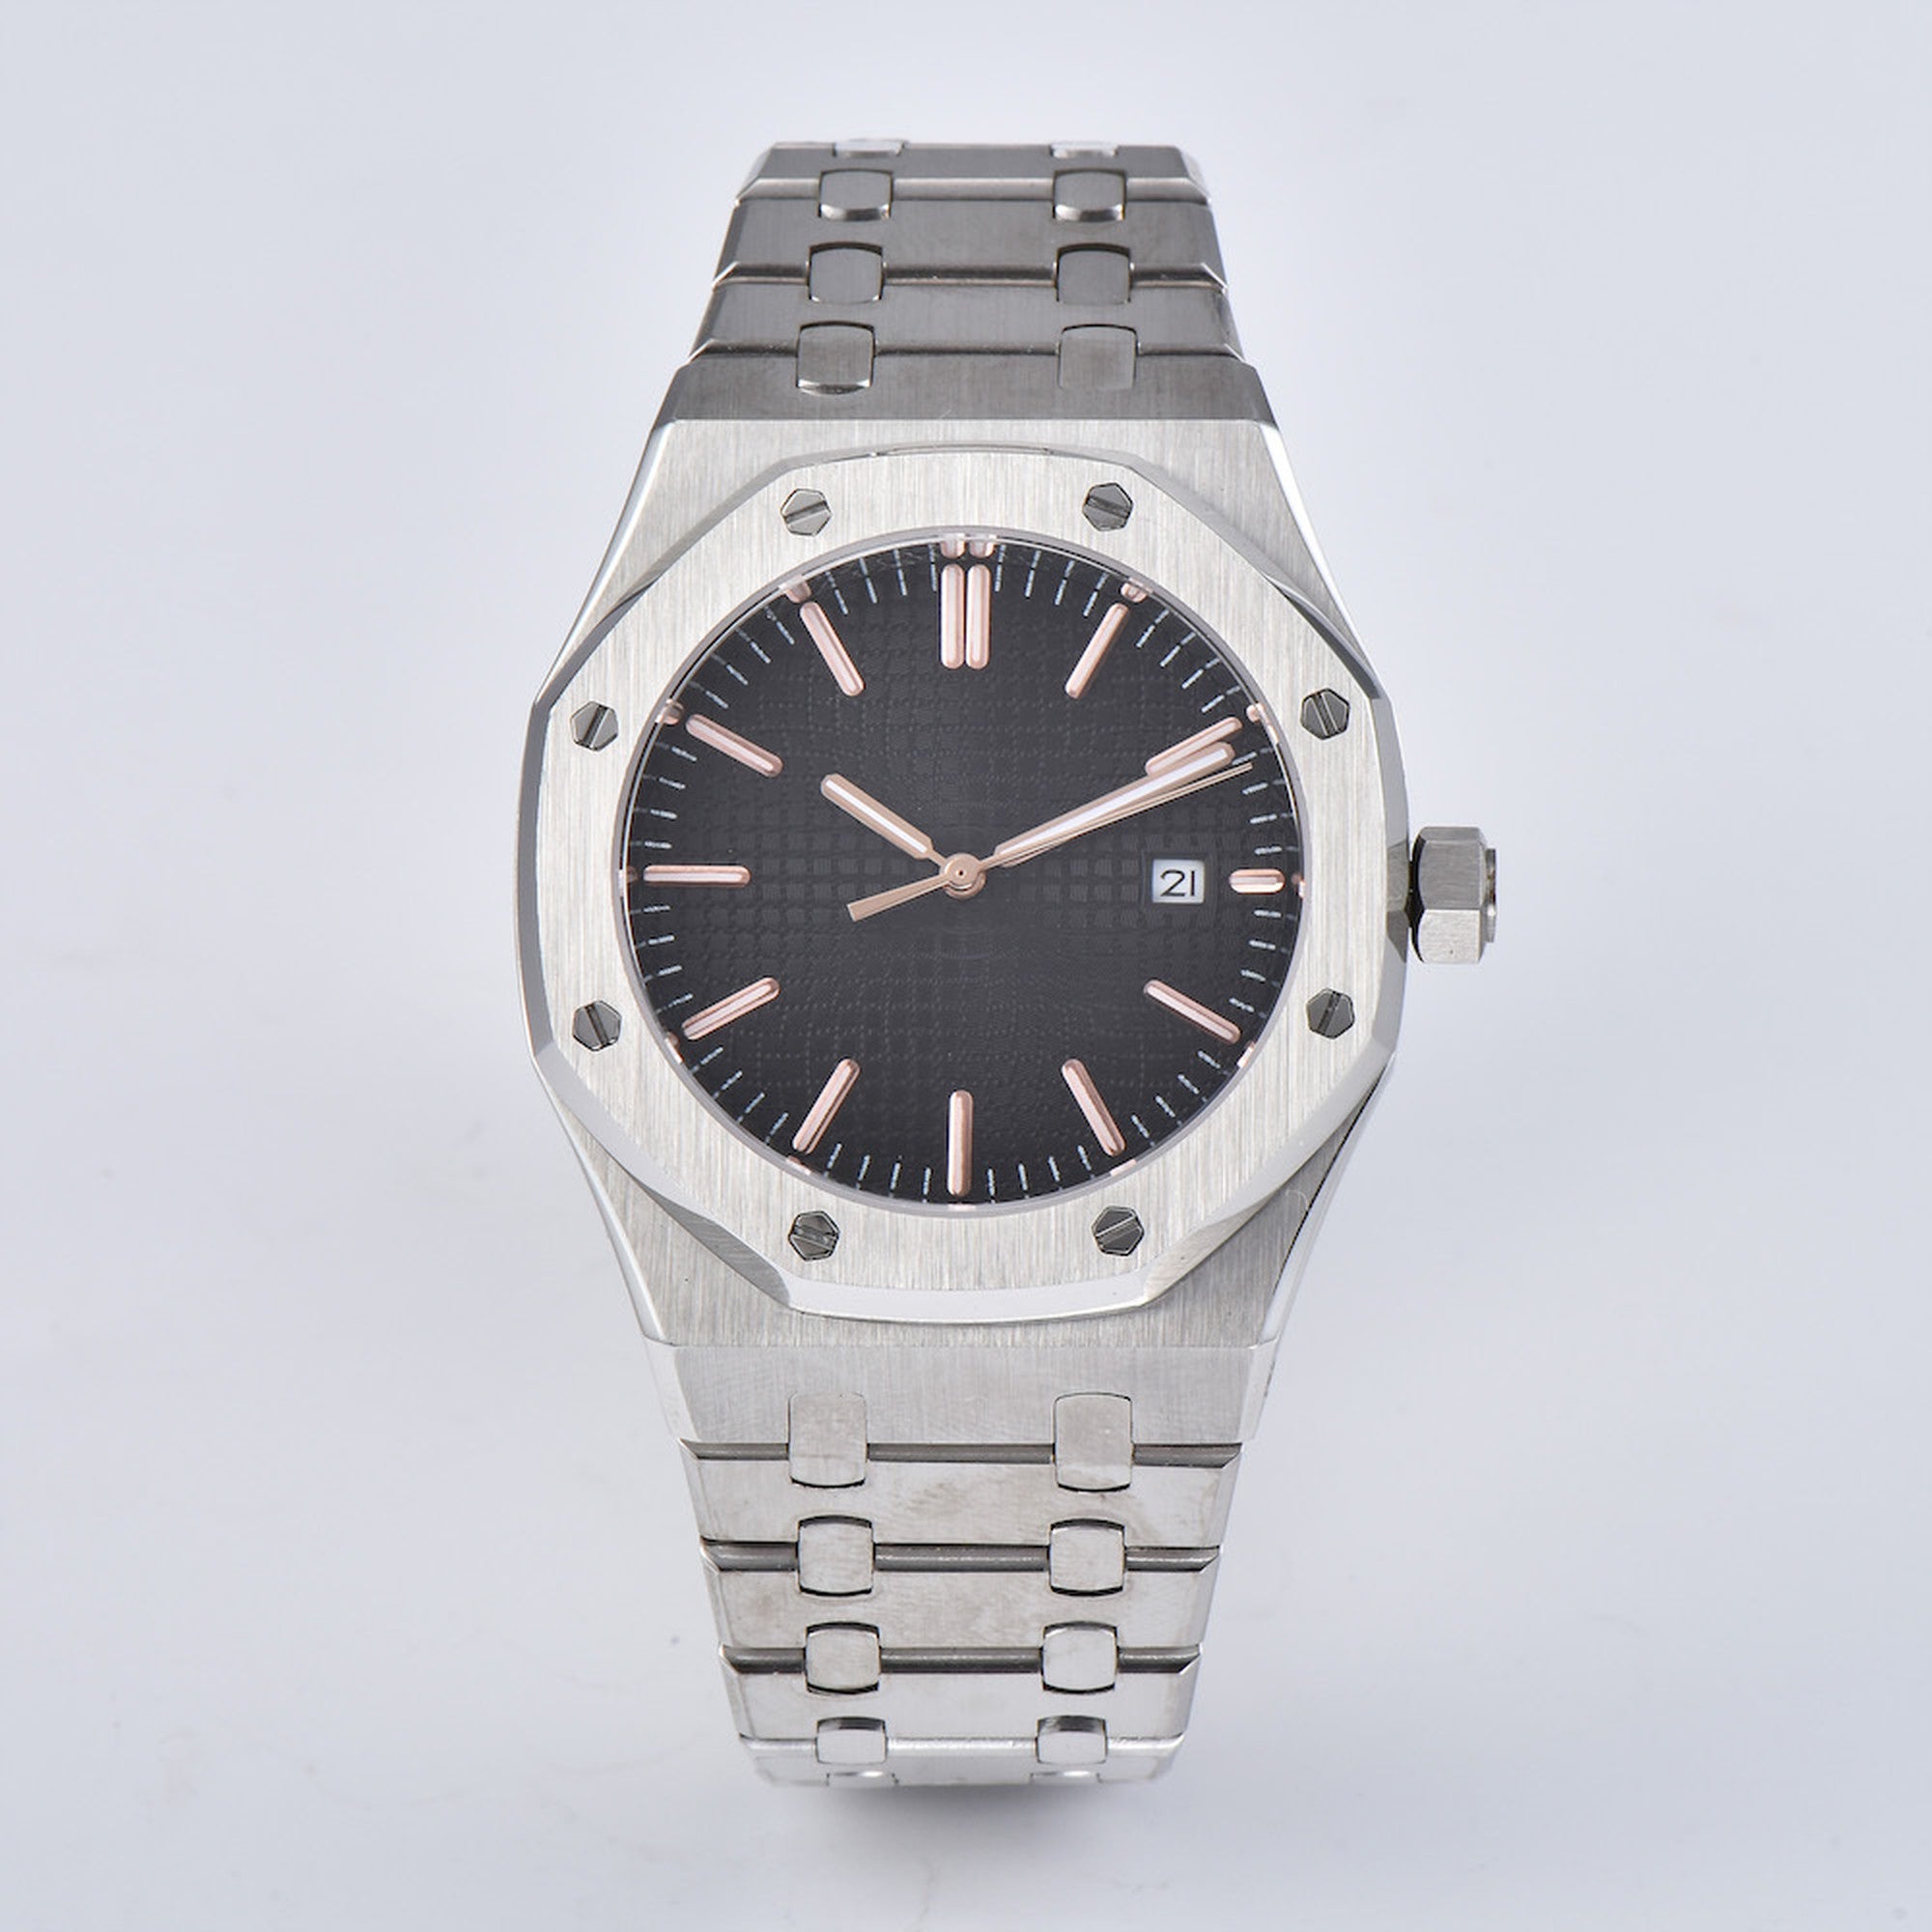 Mechanical Men's Automatic: Stainless Steel Watch Black / Rose Gold / Suit, Popular Brand / Fashion AP76